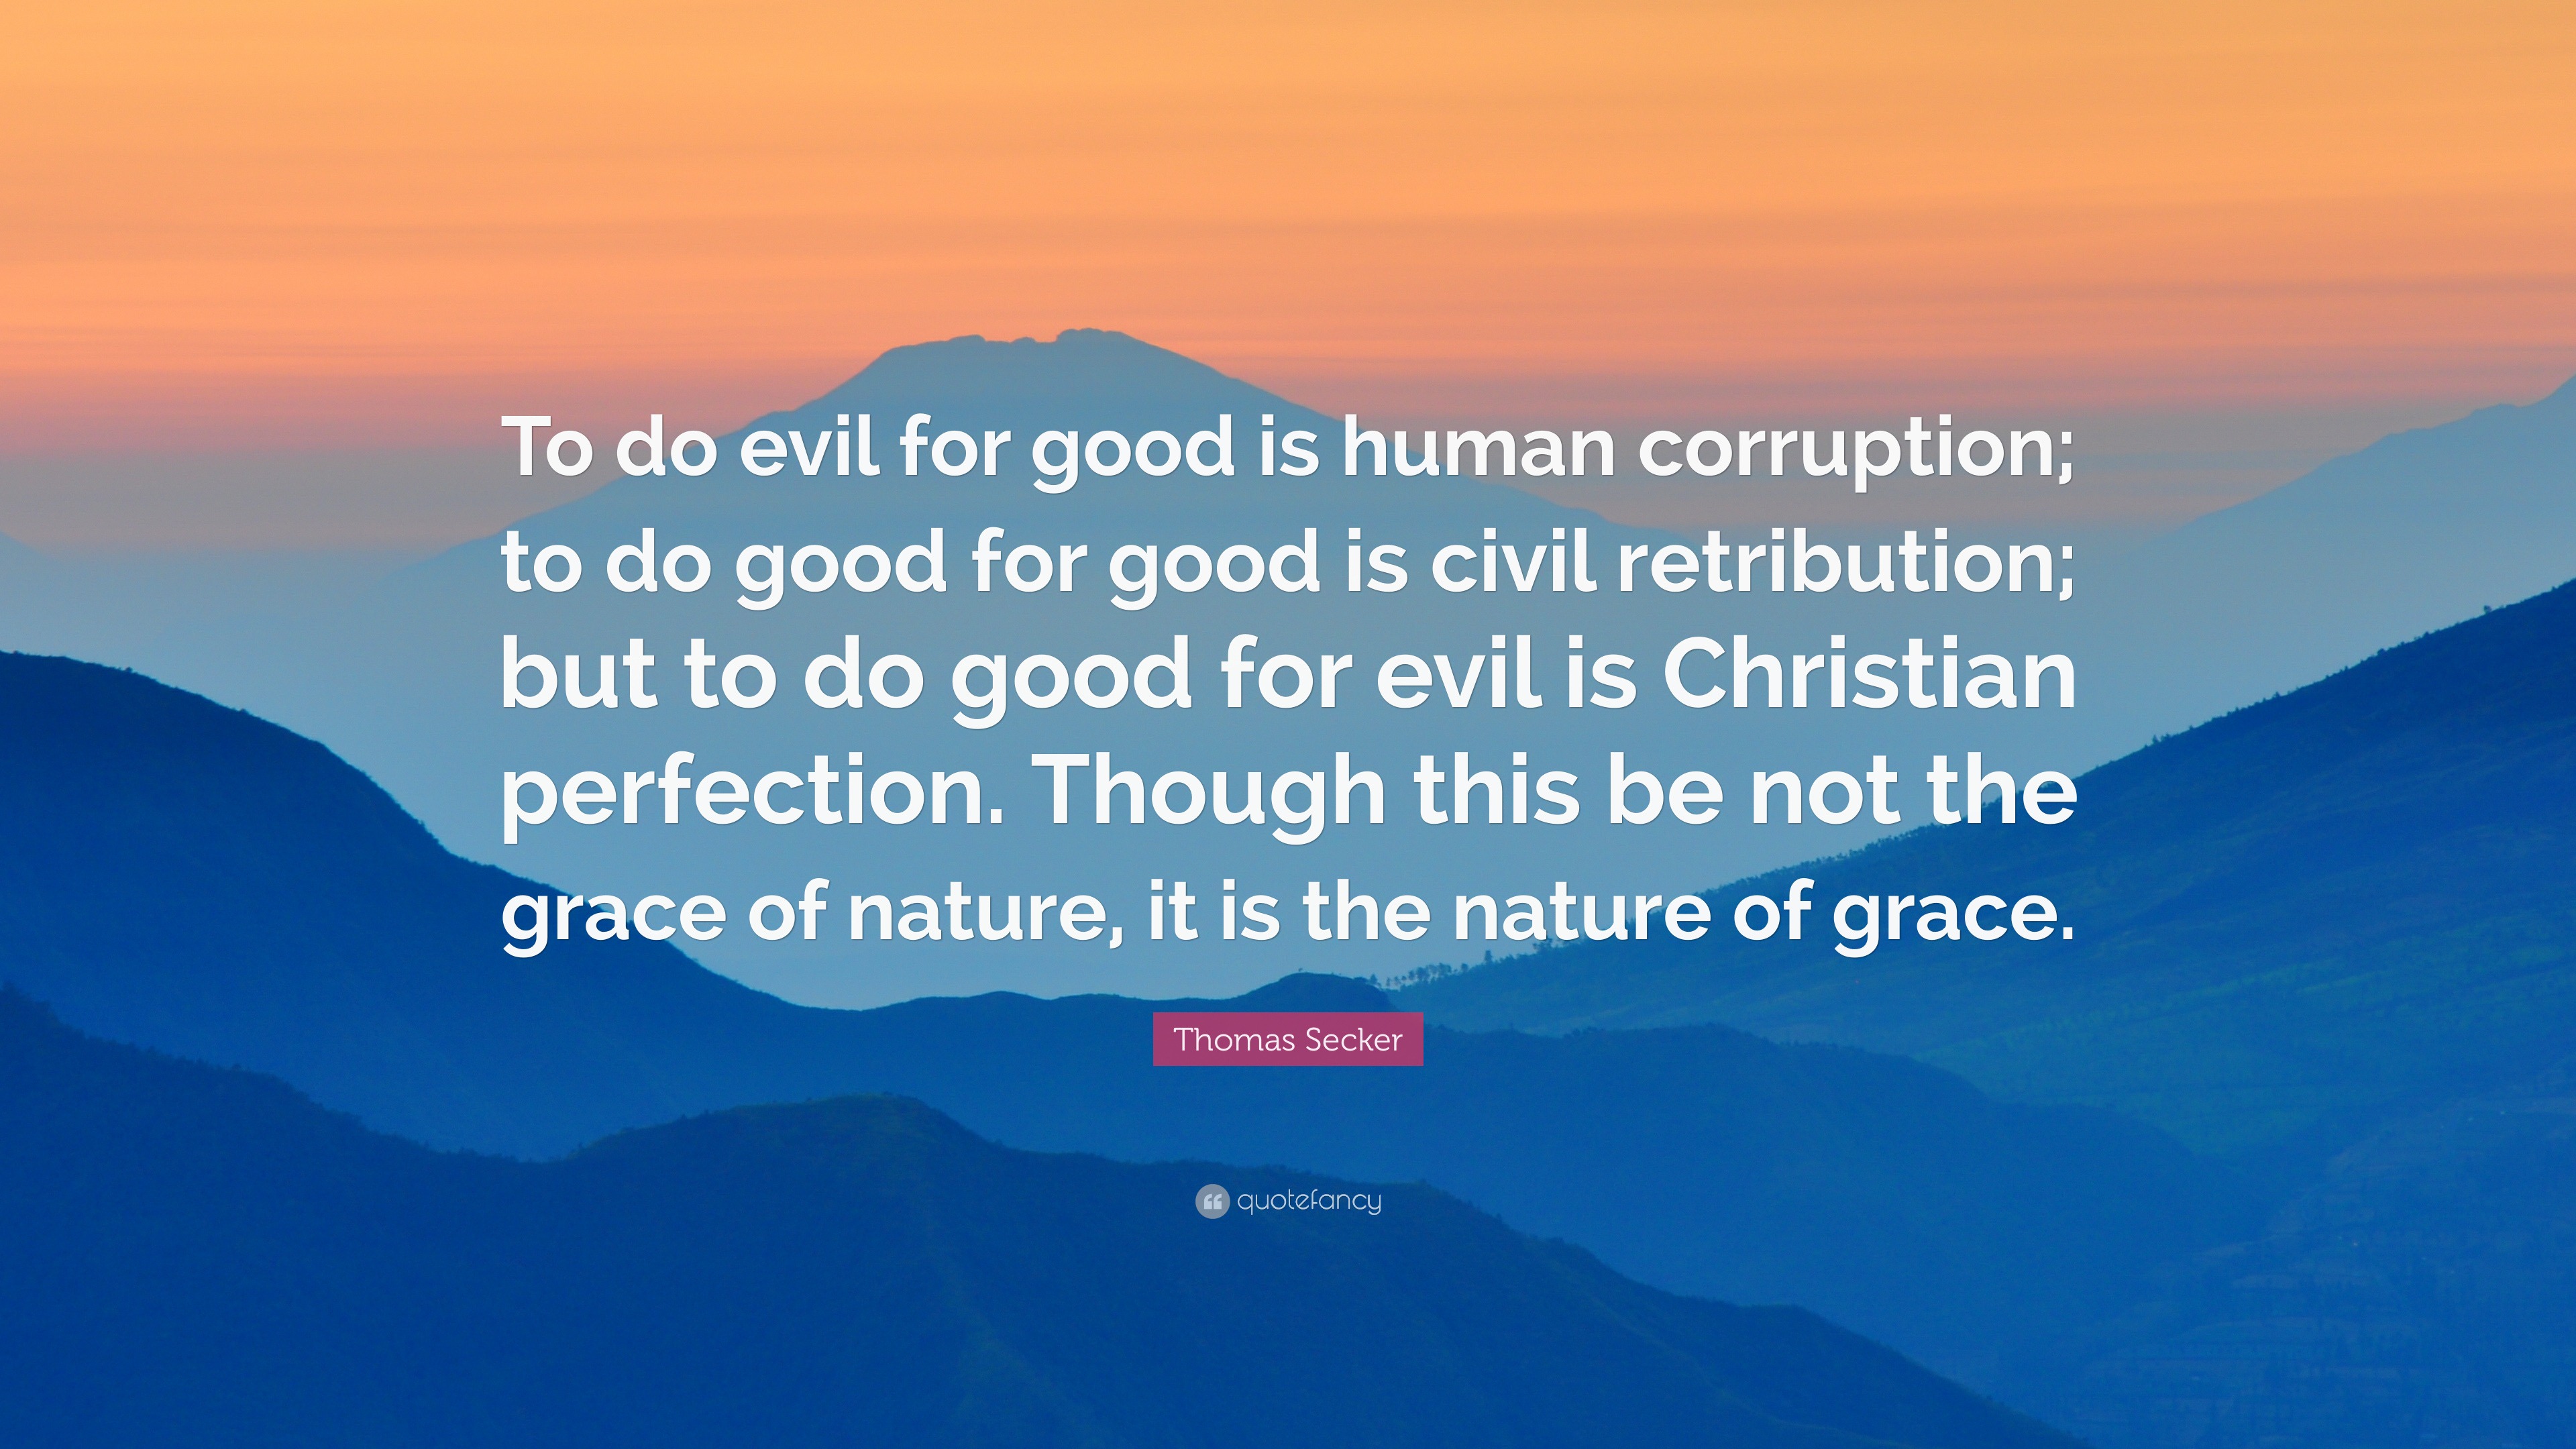 Thomas Secker Quote: “To do evil for good is human corruption; to do for good is civil retribution; but to do good evil is Christian ...”